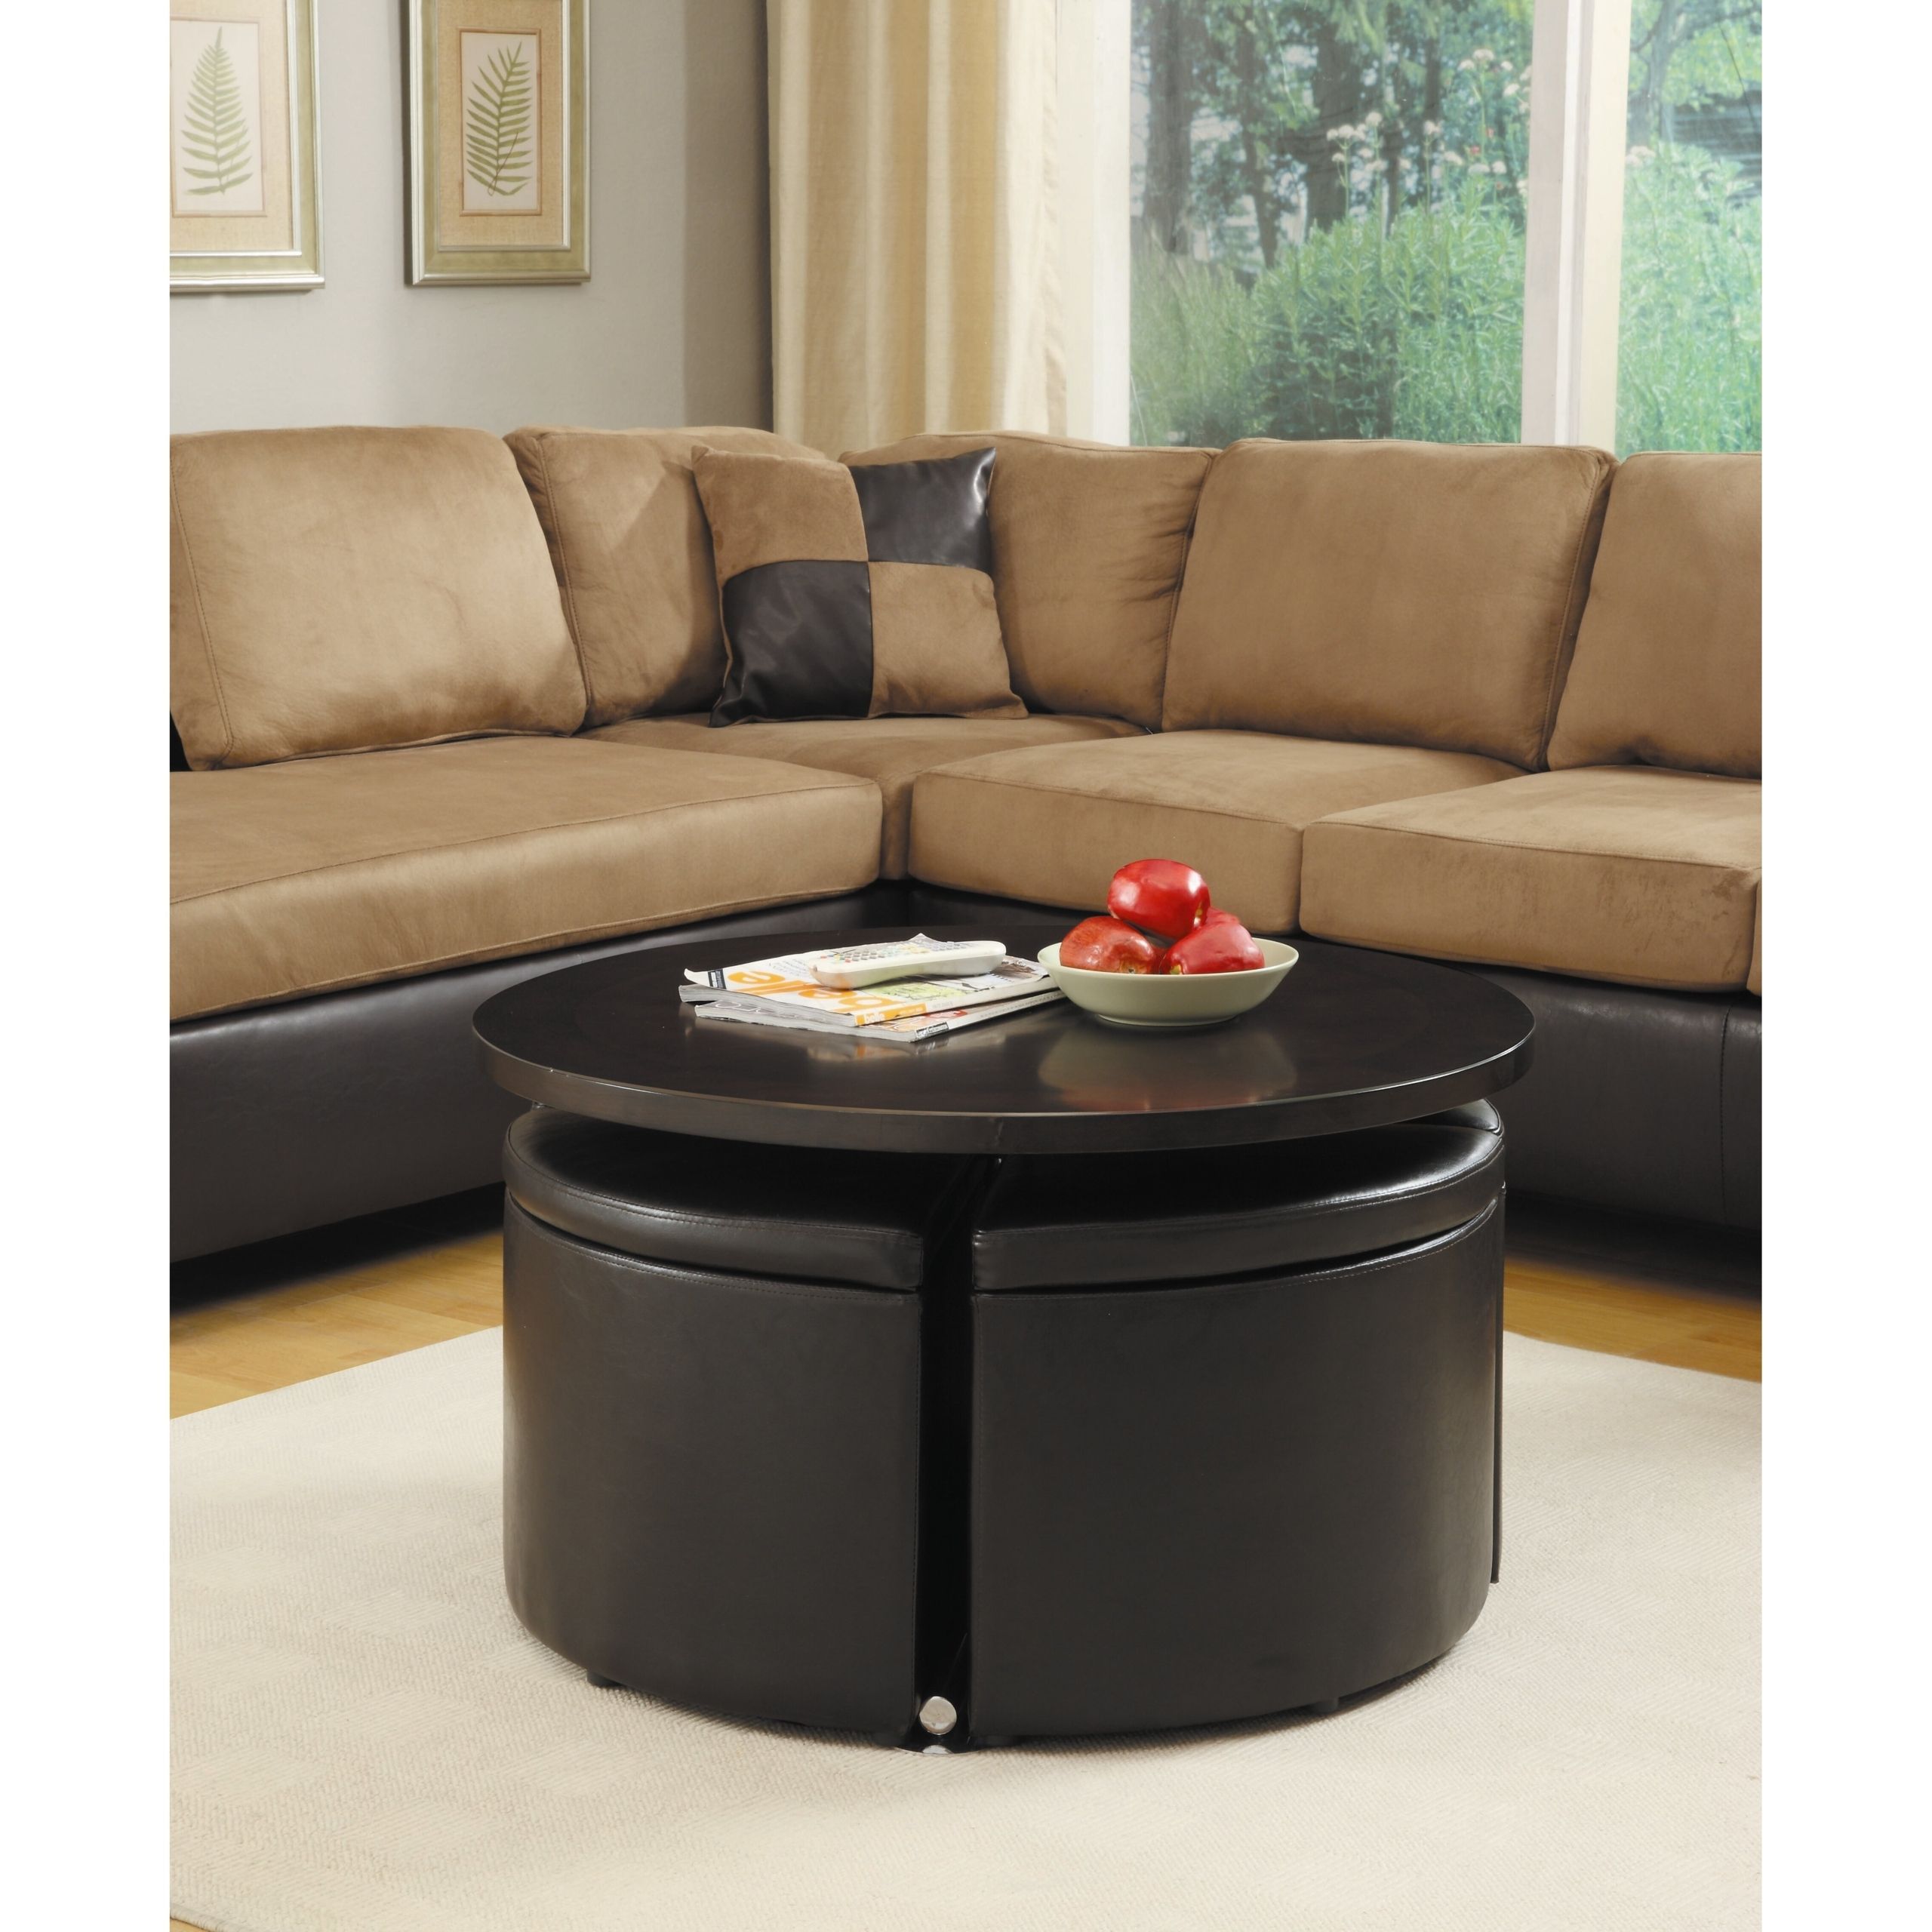 Round Ottoman Coffee Table With Storage – Foter With Round Coffee Tables With Storage (View 7 of 15)